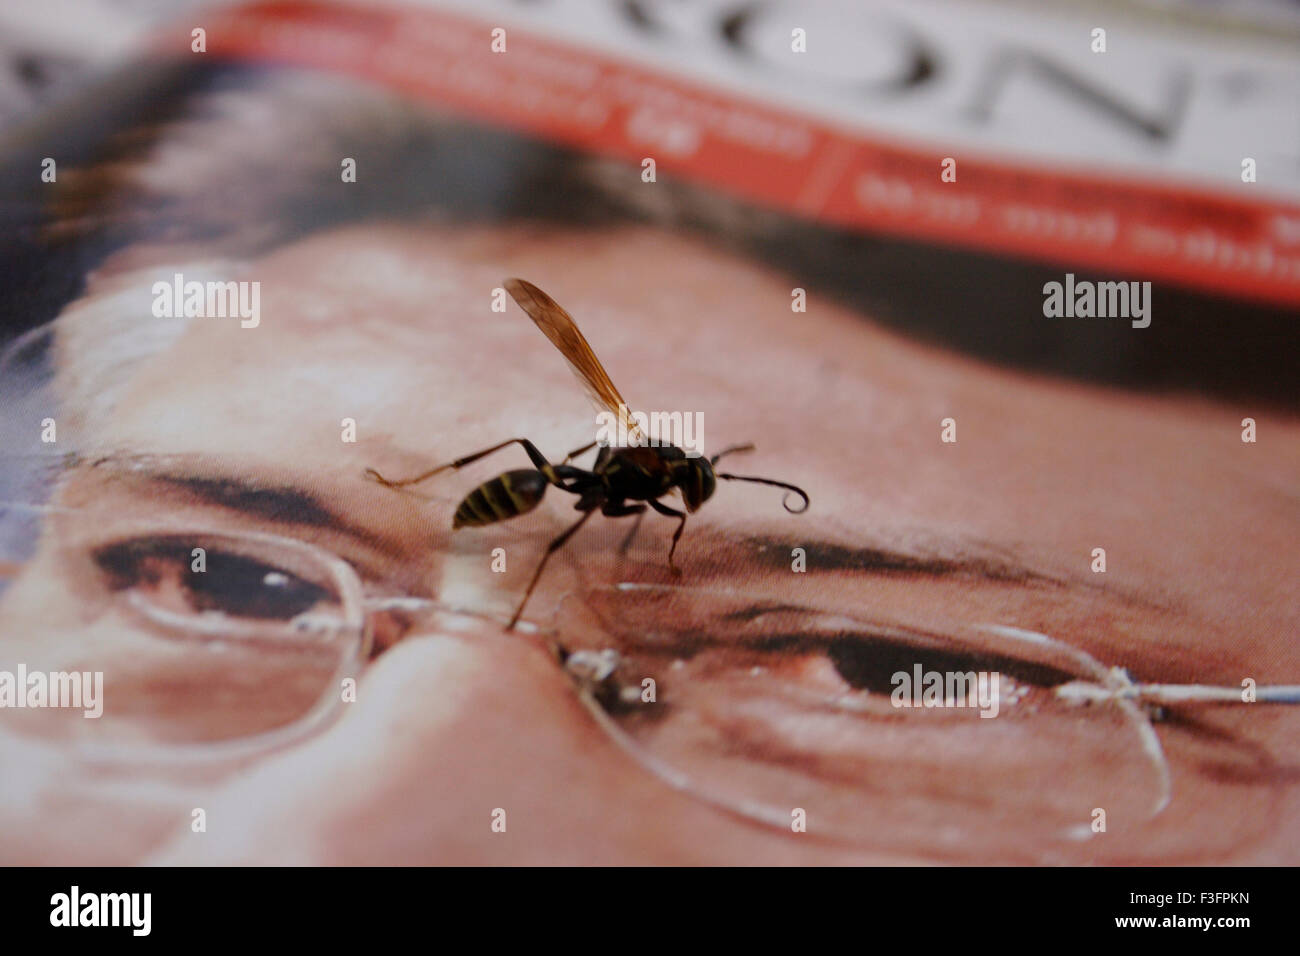 Wasp insect sitting on picture of President Pervez Musharraf of Pakistan Stock Photo